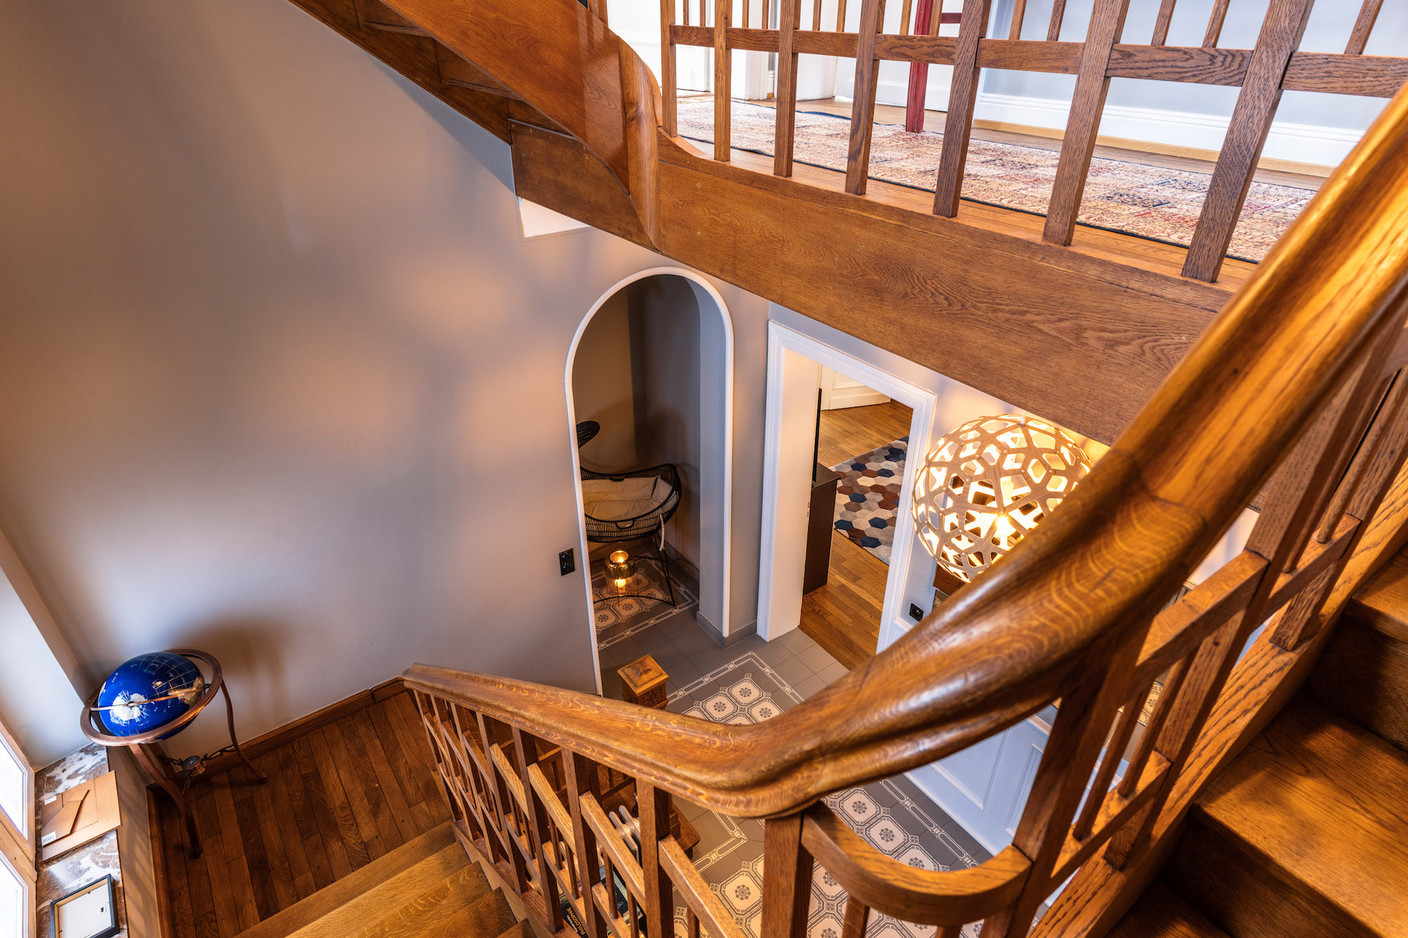 The central stairway, a centrepiece of the 1920s townhouse, seen after renovation work was completed in April 2021. Photo provided by Aatika Hayat